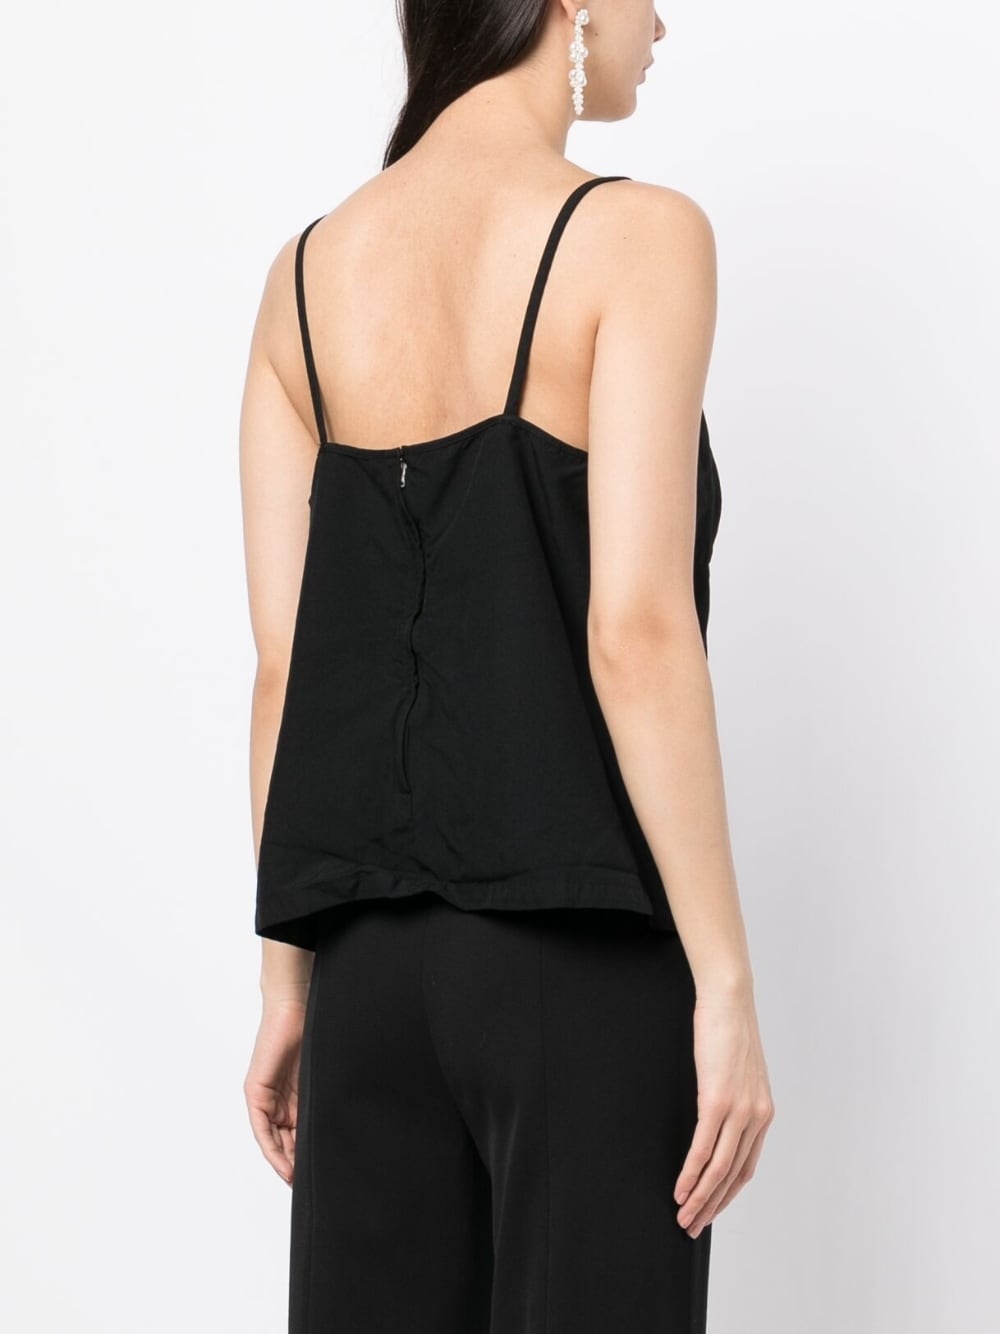 V-neck camisole top - 4